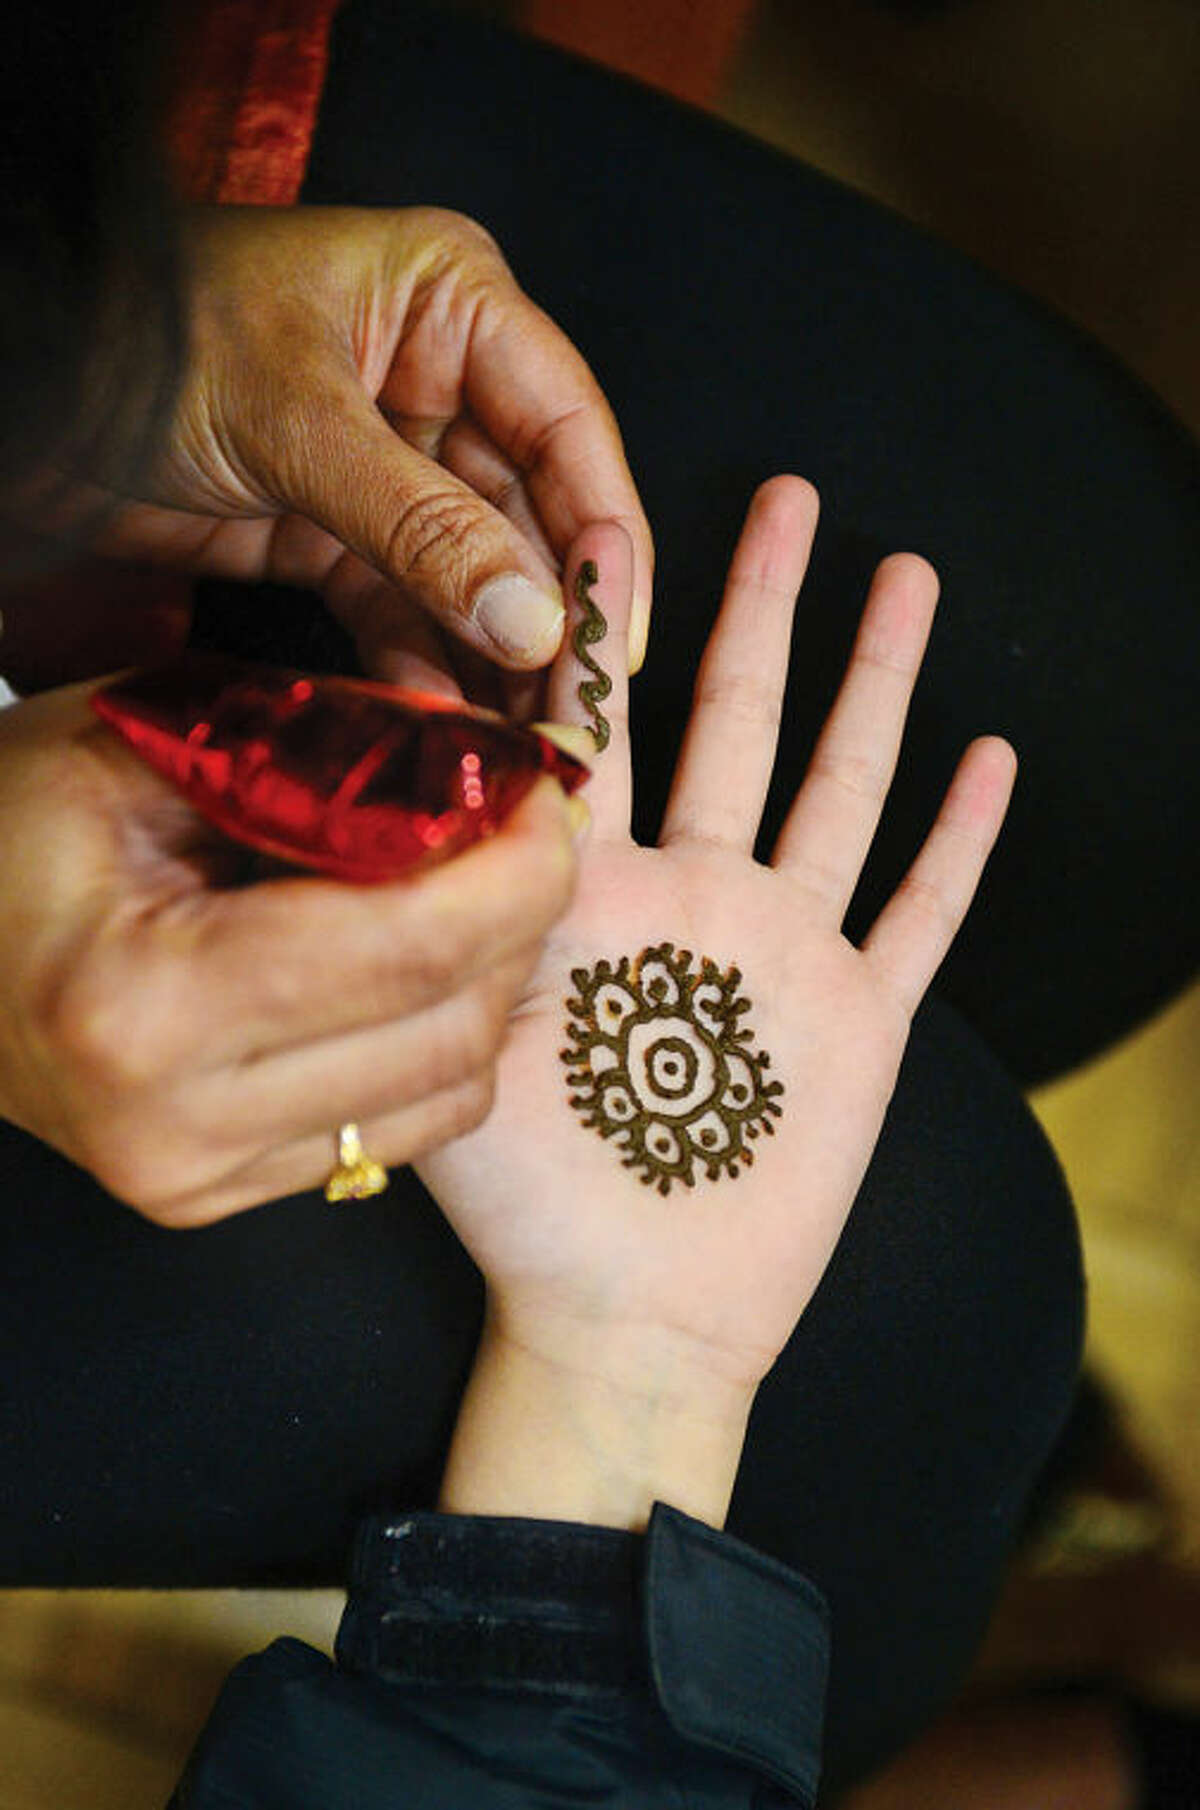 Hour photo / Erik Trautmann Visitors had their hands painted with Henna during an Indian Spring Festival at the Wilton Family YMCA Saturday afternoon.